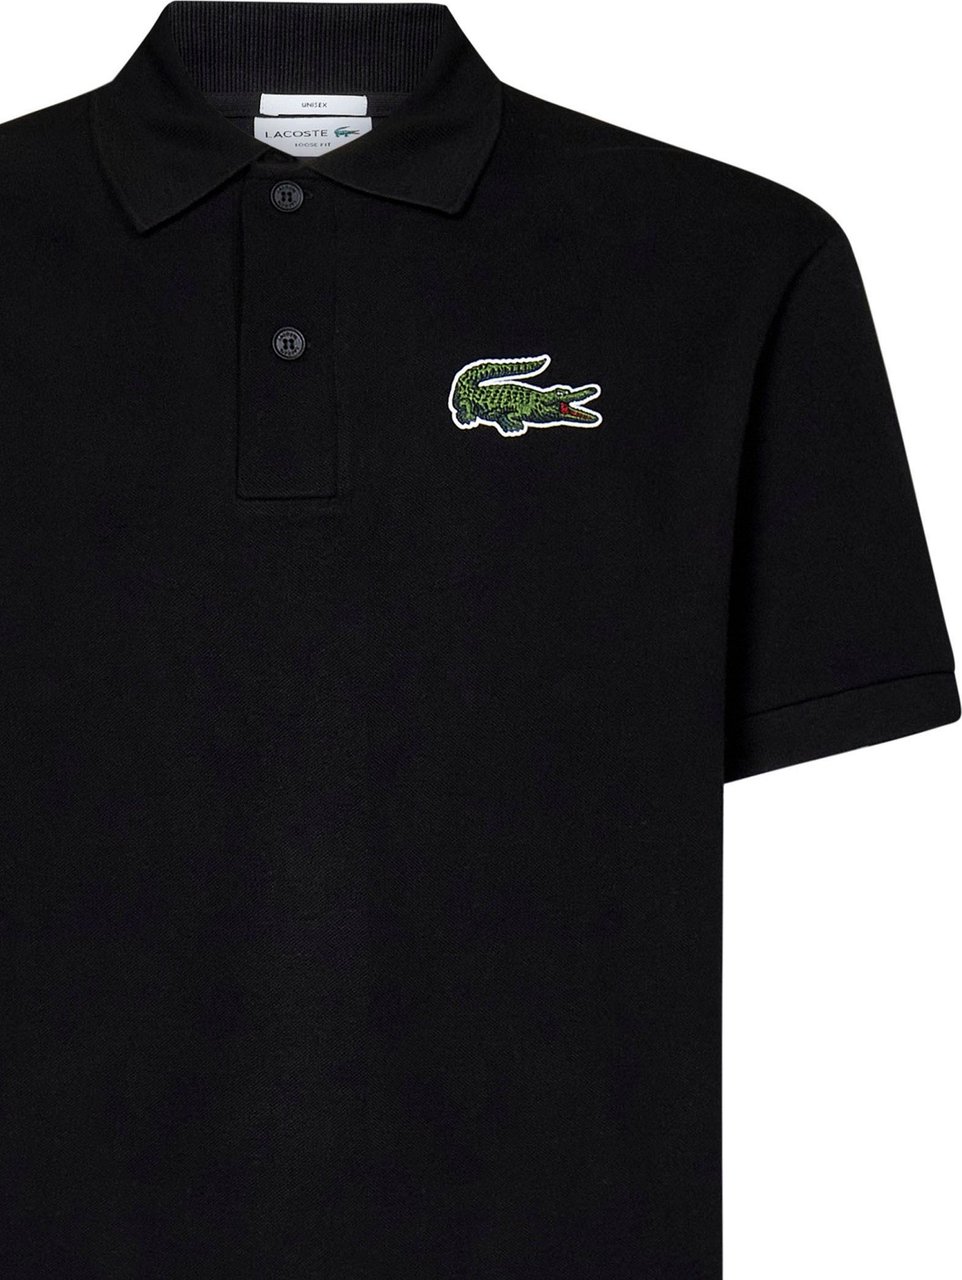 Lacoste Lacoste T-shirts and Polos Black Zwart